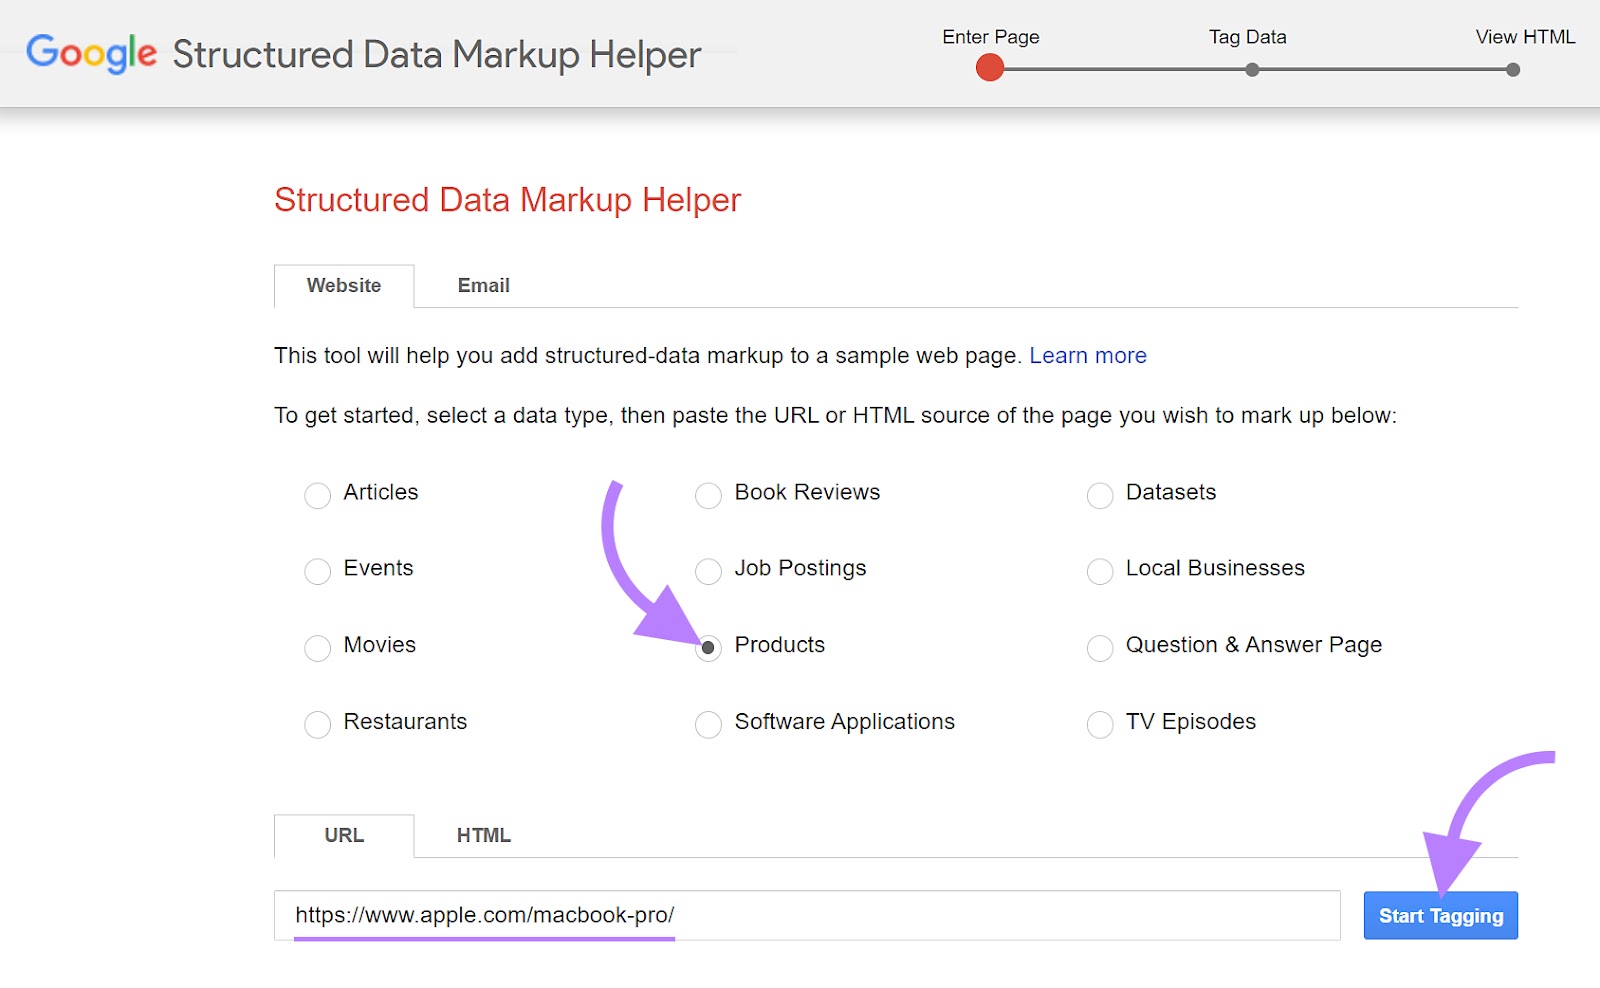 Google Structured Data Markup Helper with the “Products” enactment    selected and the Apple Macbook Pro URL successful  the hunt  bar.